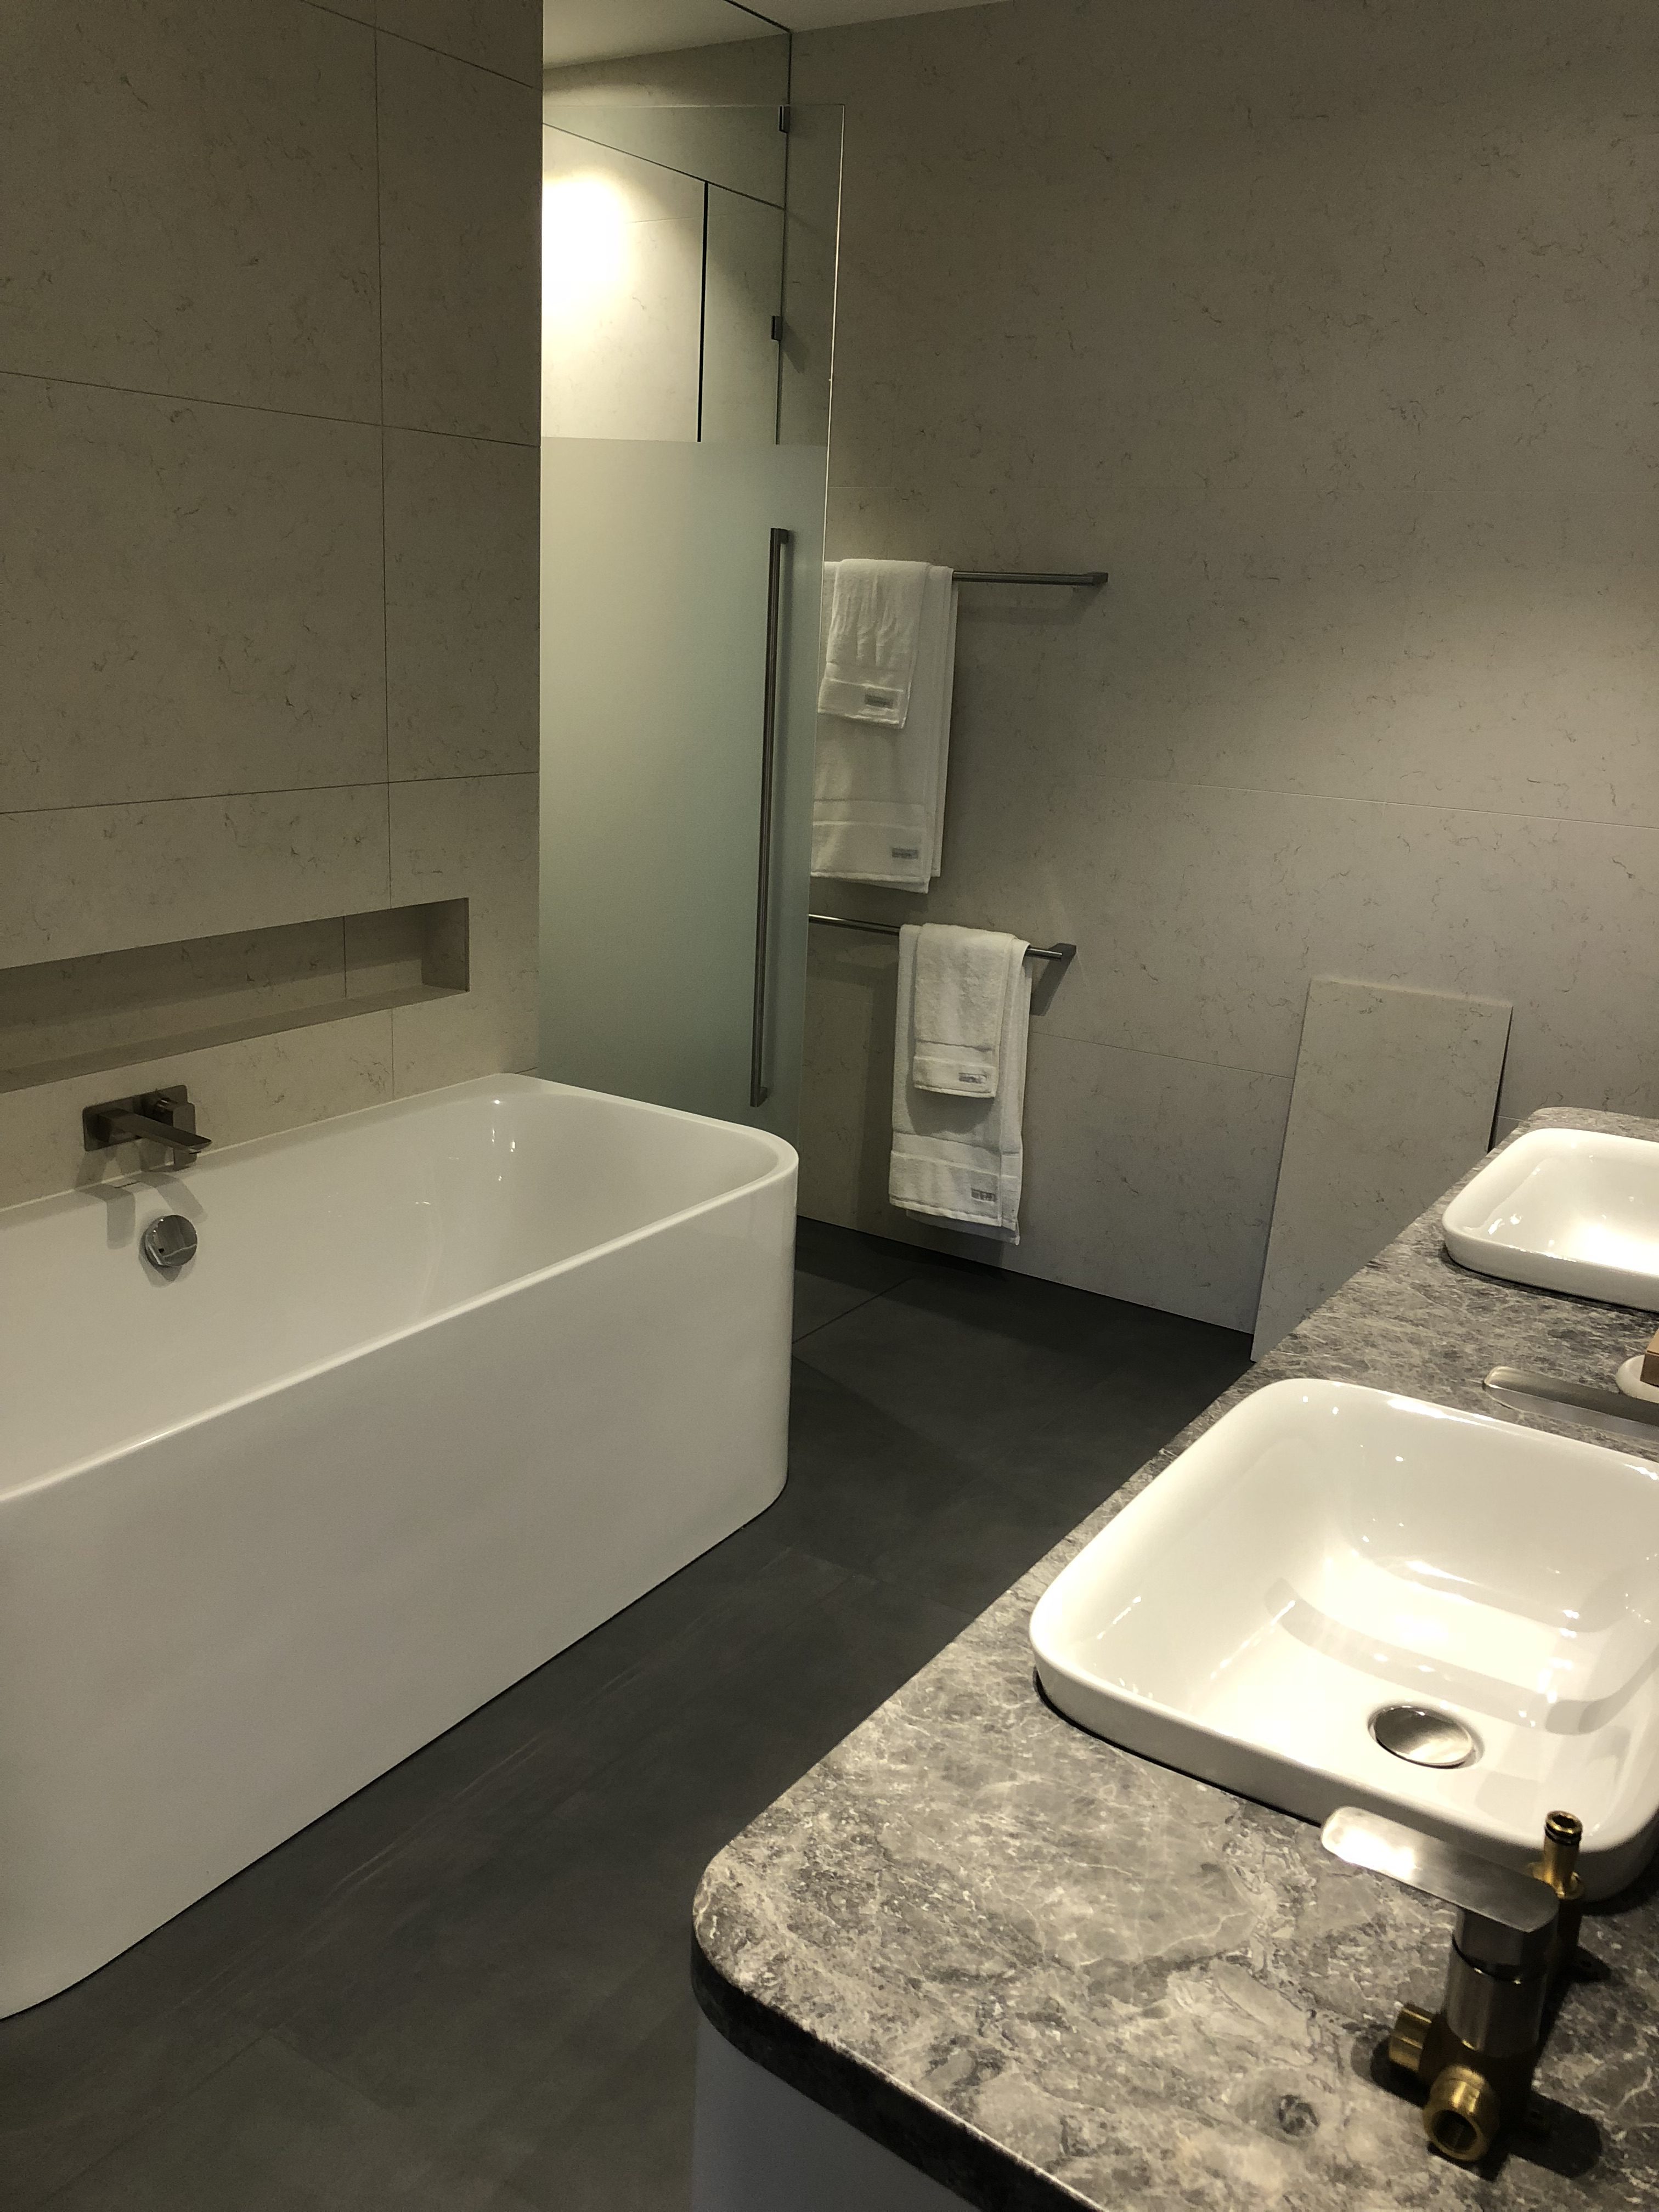 Photo of the example bathroom at the display suite (taken 14/06/18 by PropertyMash)